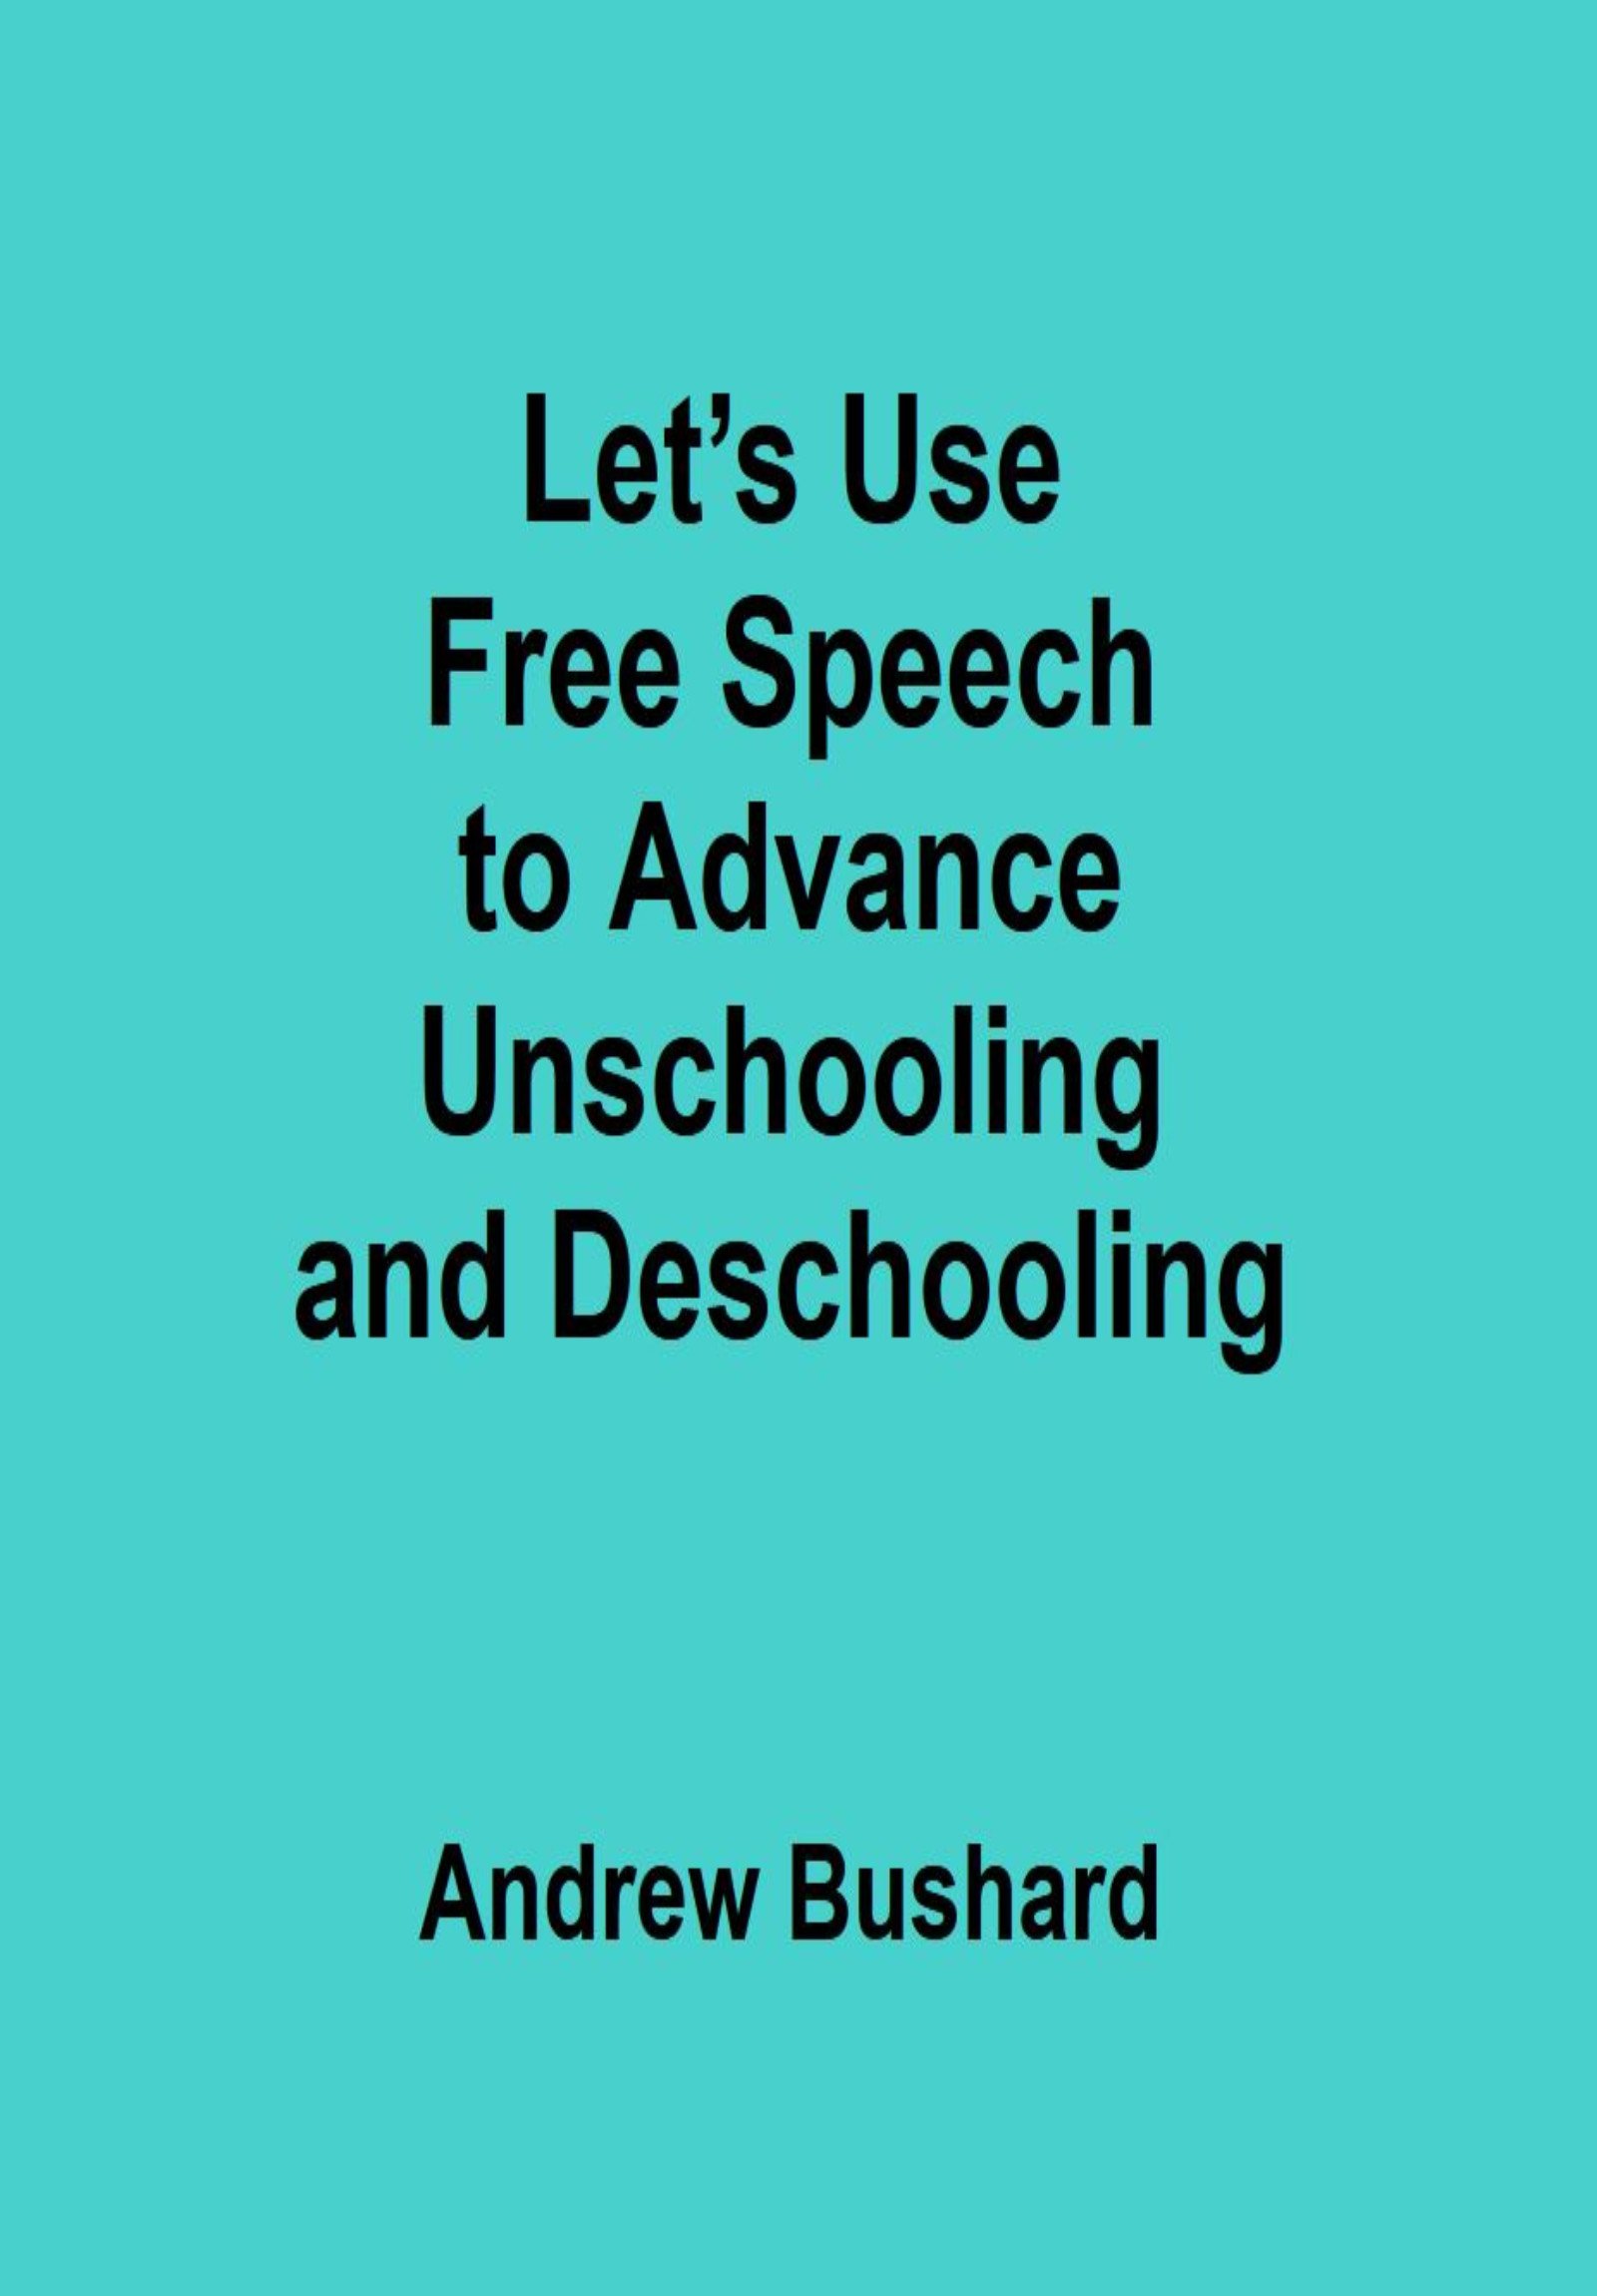 Let's Use Free Speech to Advance Unschooling